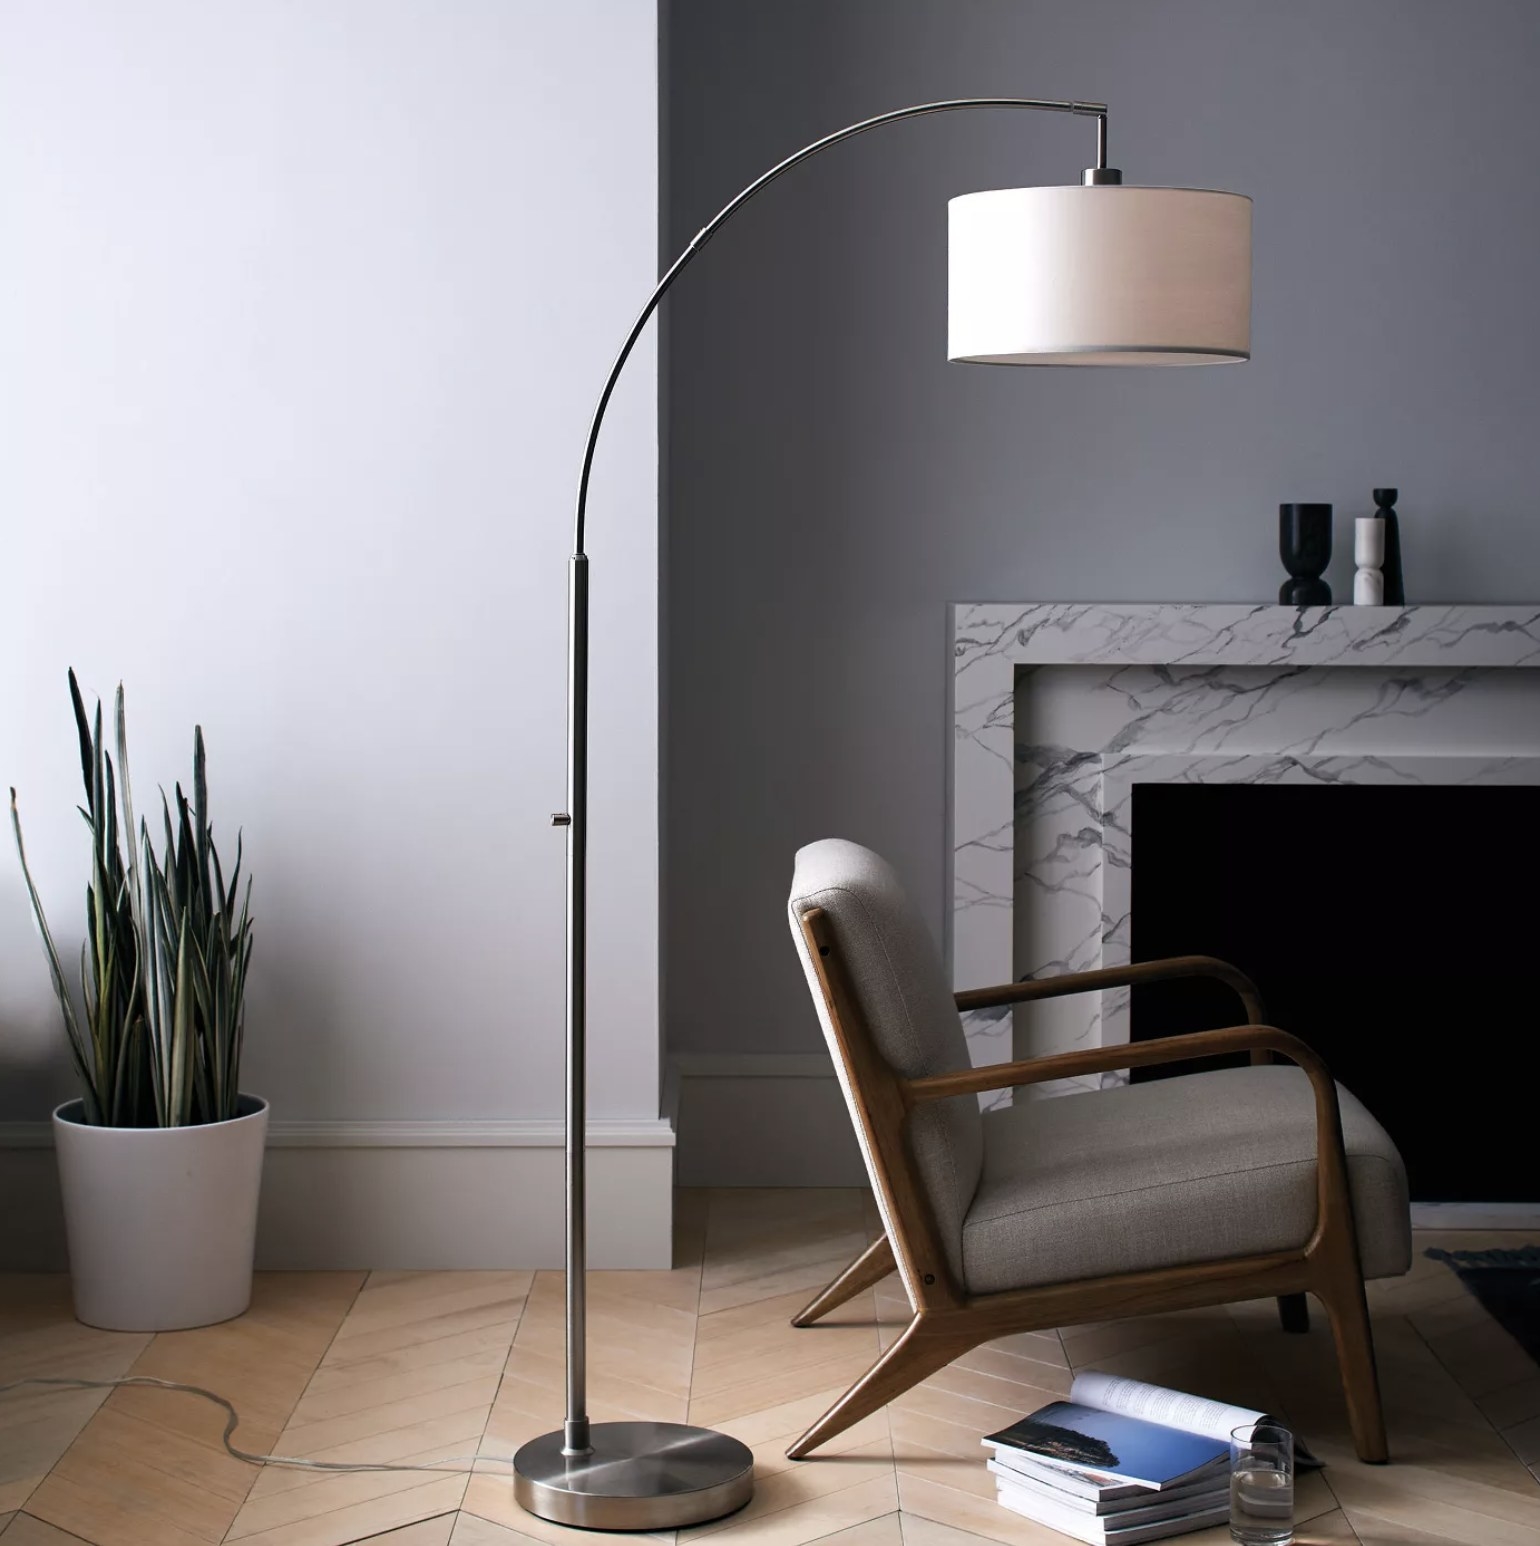 The floor lamp next to a chair